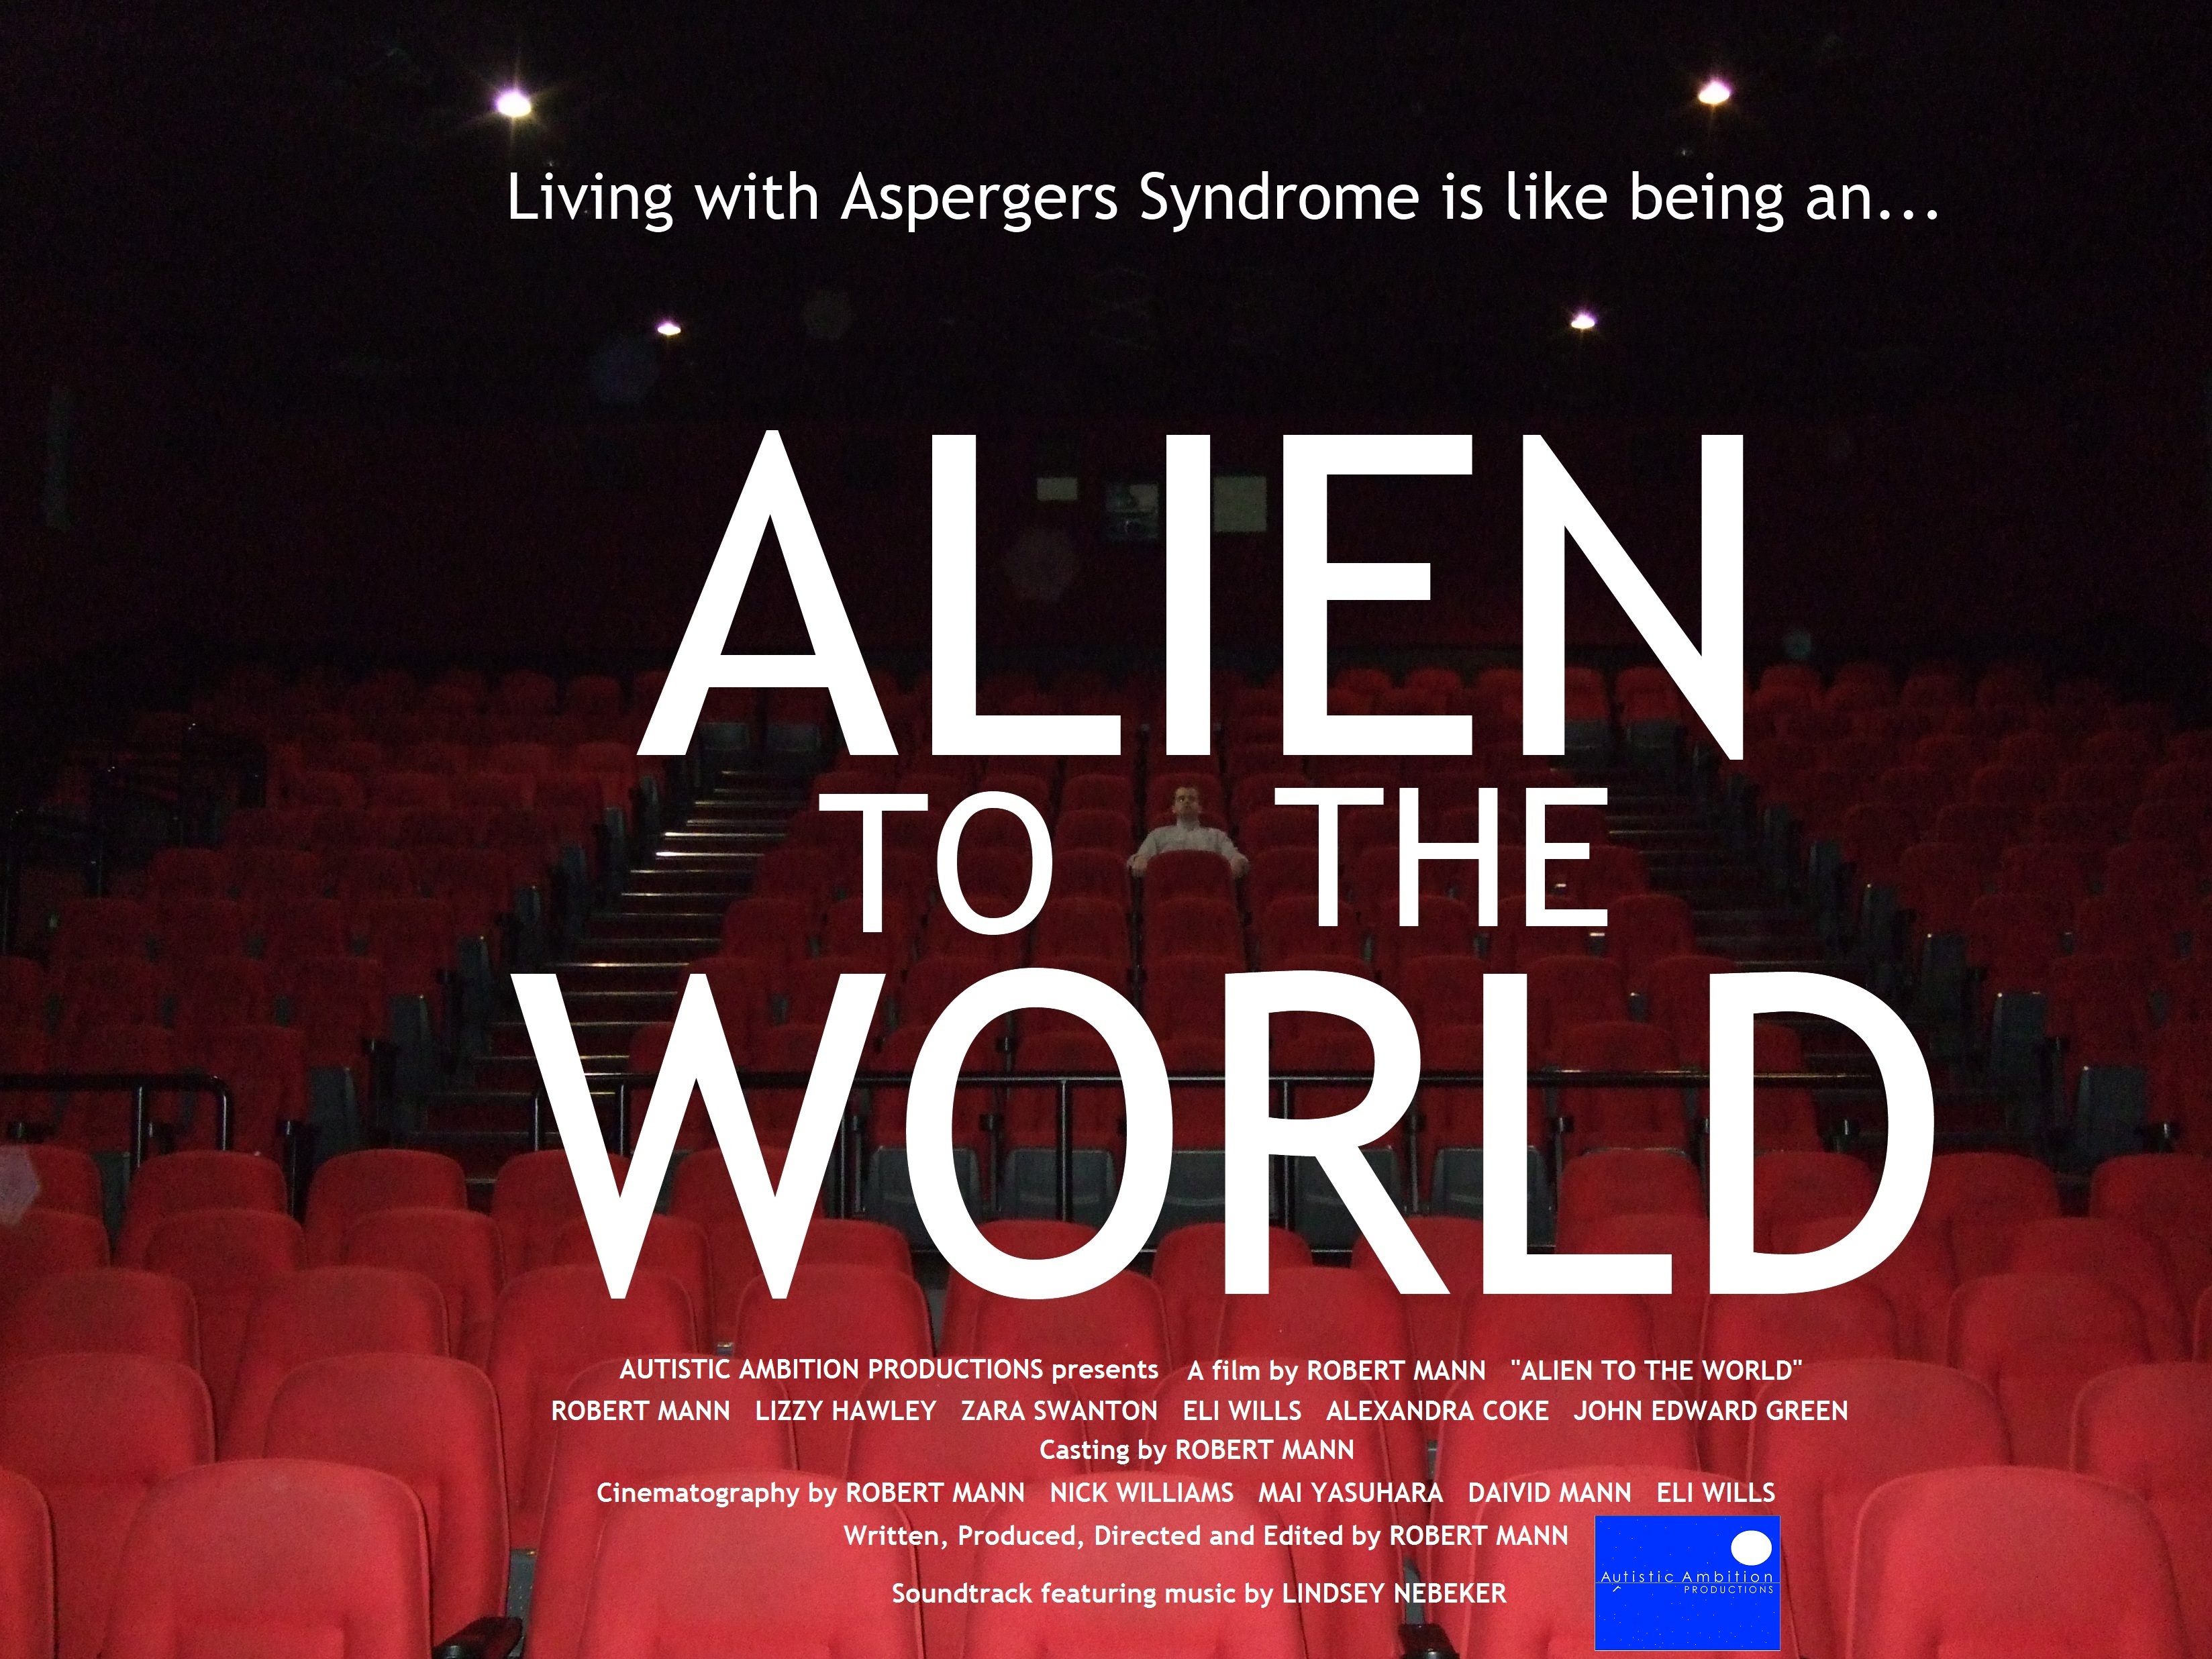 "Alien to the World" documentary poster (courtesy of Robert Mann, M.A.)